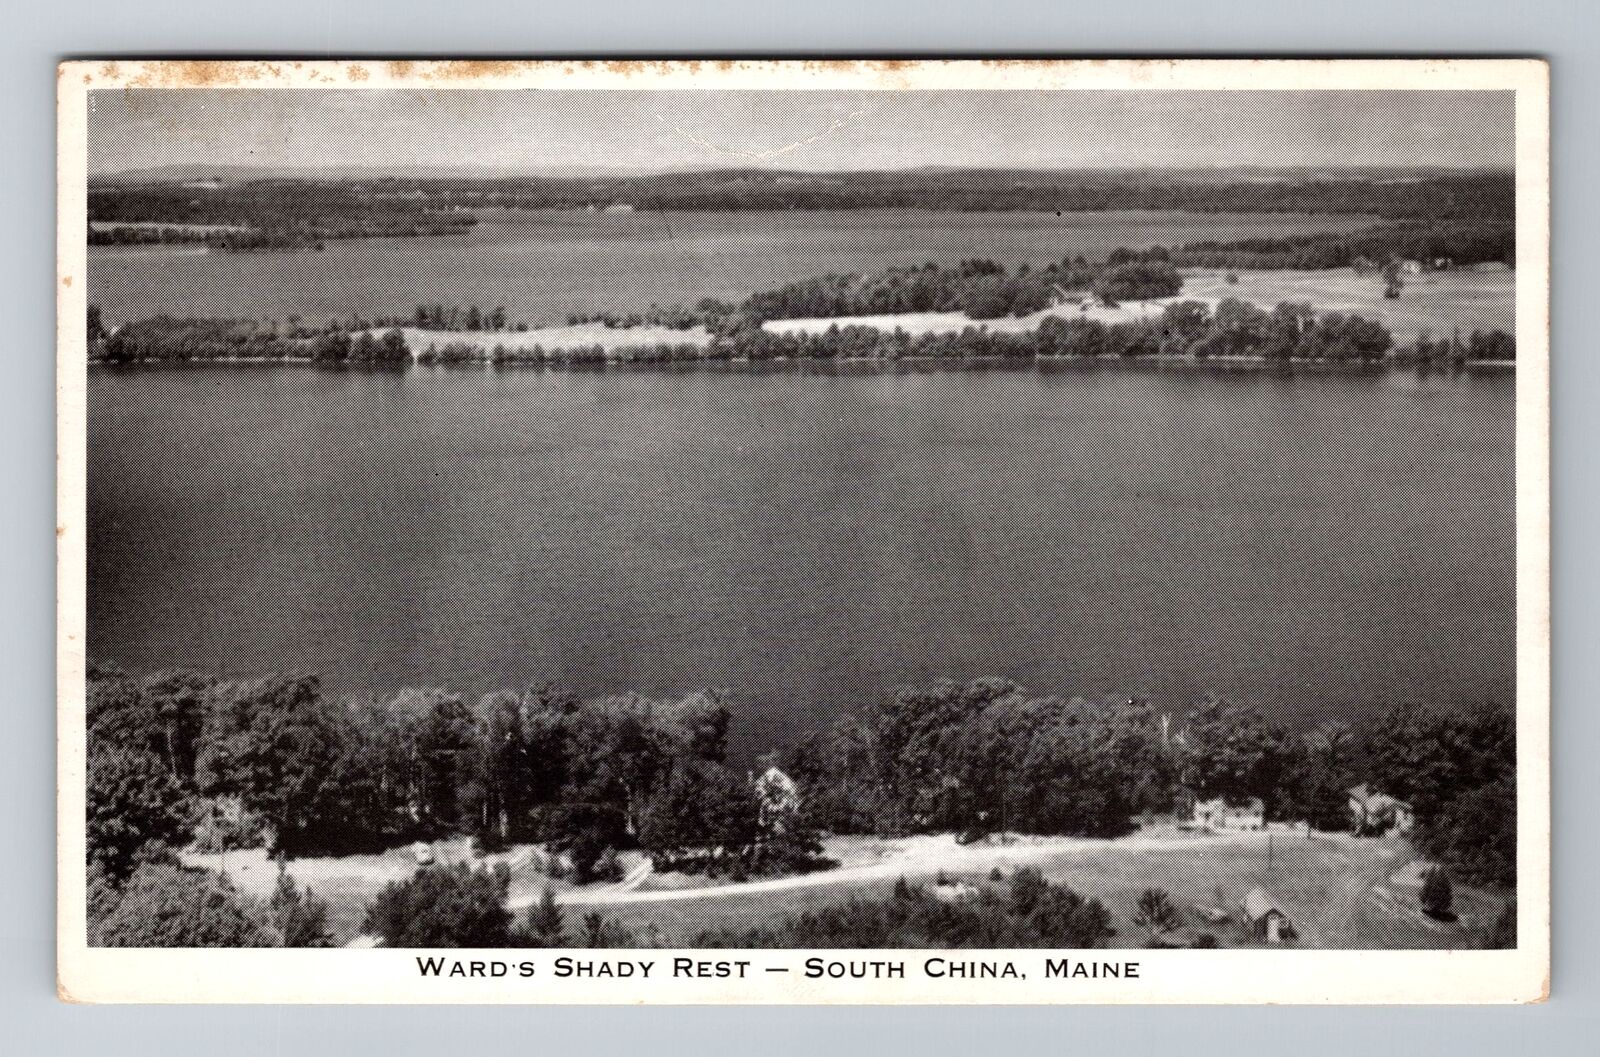 South China ME-Maine, Ward's Shady Rest, Aerial, Antique Vintage c1953 Postcard